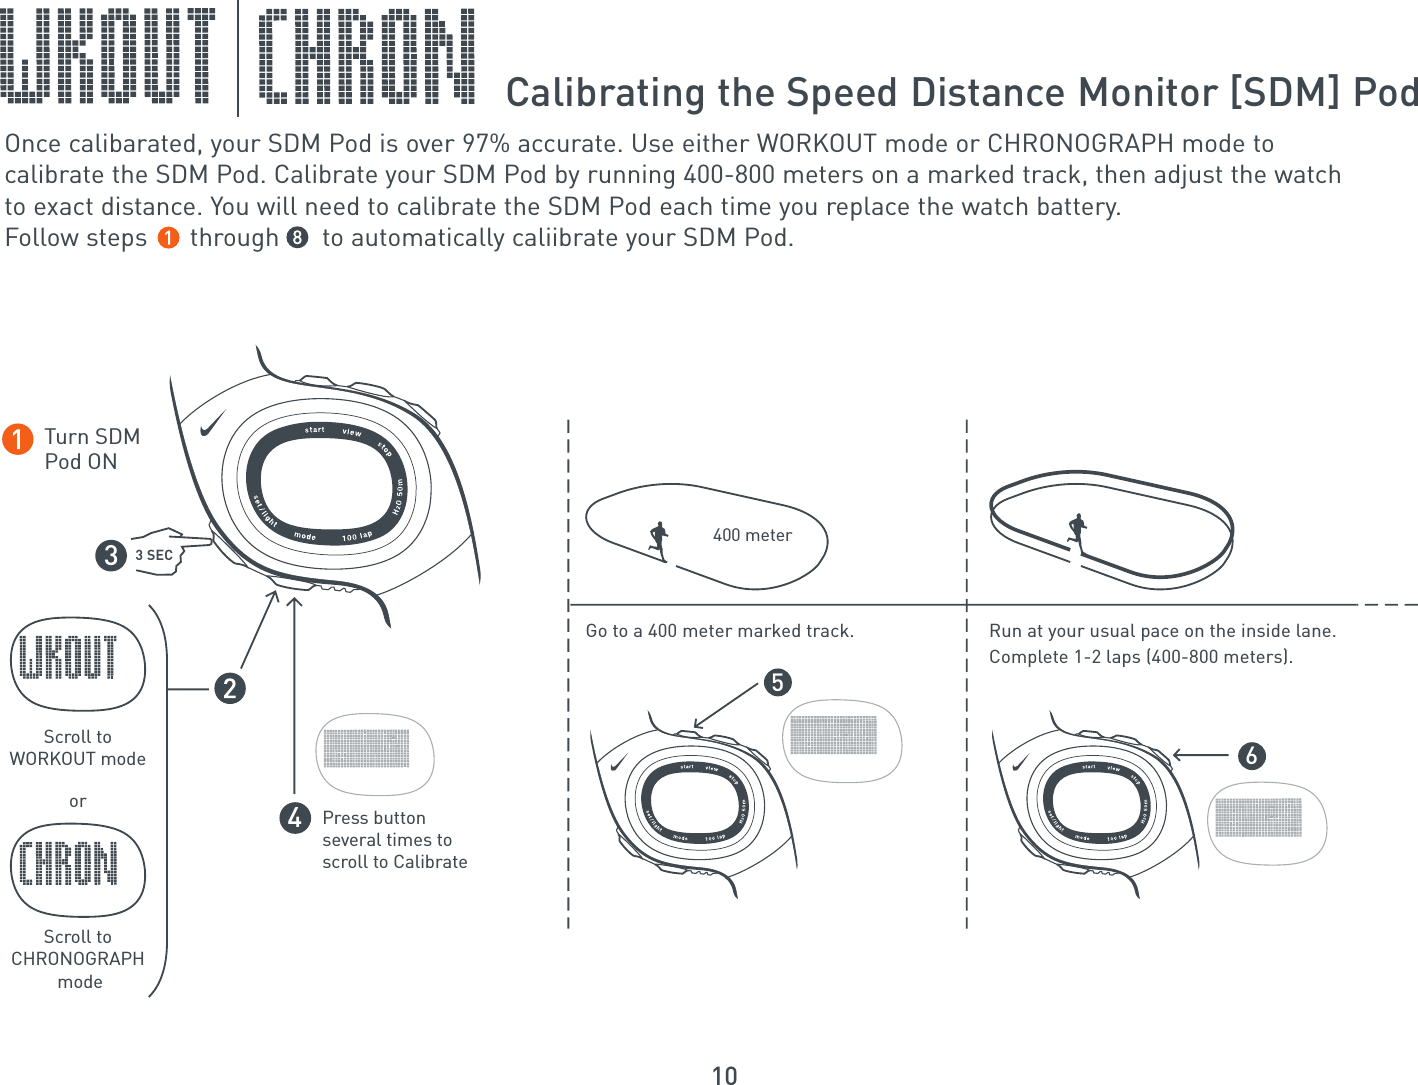 10Calibrating the Speed Distance Monitor [SDM] PodOnce calibarated, your SDM Pod is over 97% accurate. Use either WORKOUT mode or CHRONOGRAPH mode to calibrate the SDM Pod. Calibrate your SDM Pod by running 400-800 meters on a marked track, then adjust the watch to exact distance. You will need to calibrate the SDM Pod each time you replace the watch battery. Follow steps      through      to automatically caliibrate your SDM Pod.Scroll toWORKOUT modeTurn SDMPod ONorScroll toCHRONOGRAPH mode3 SECPress button several times to scroll to Calibrate3456Run at your usual pace on the inside lane.Complete 1-2 laps (400-800 meters).Go to a 400 meter marked track.400 meter